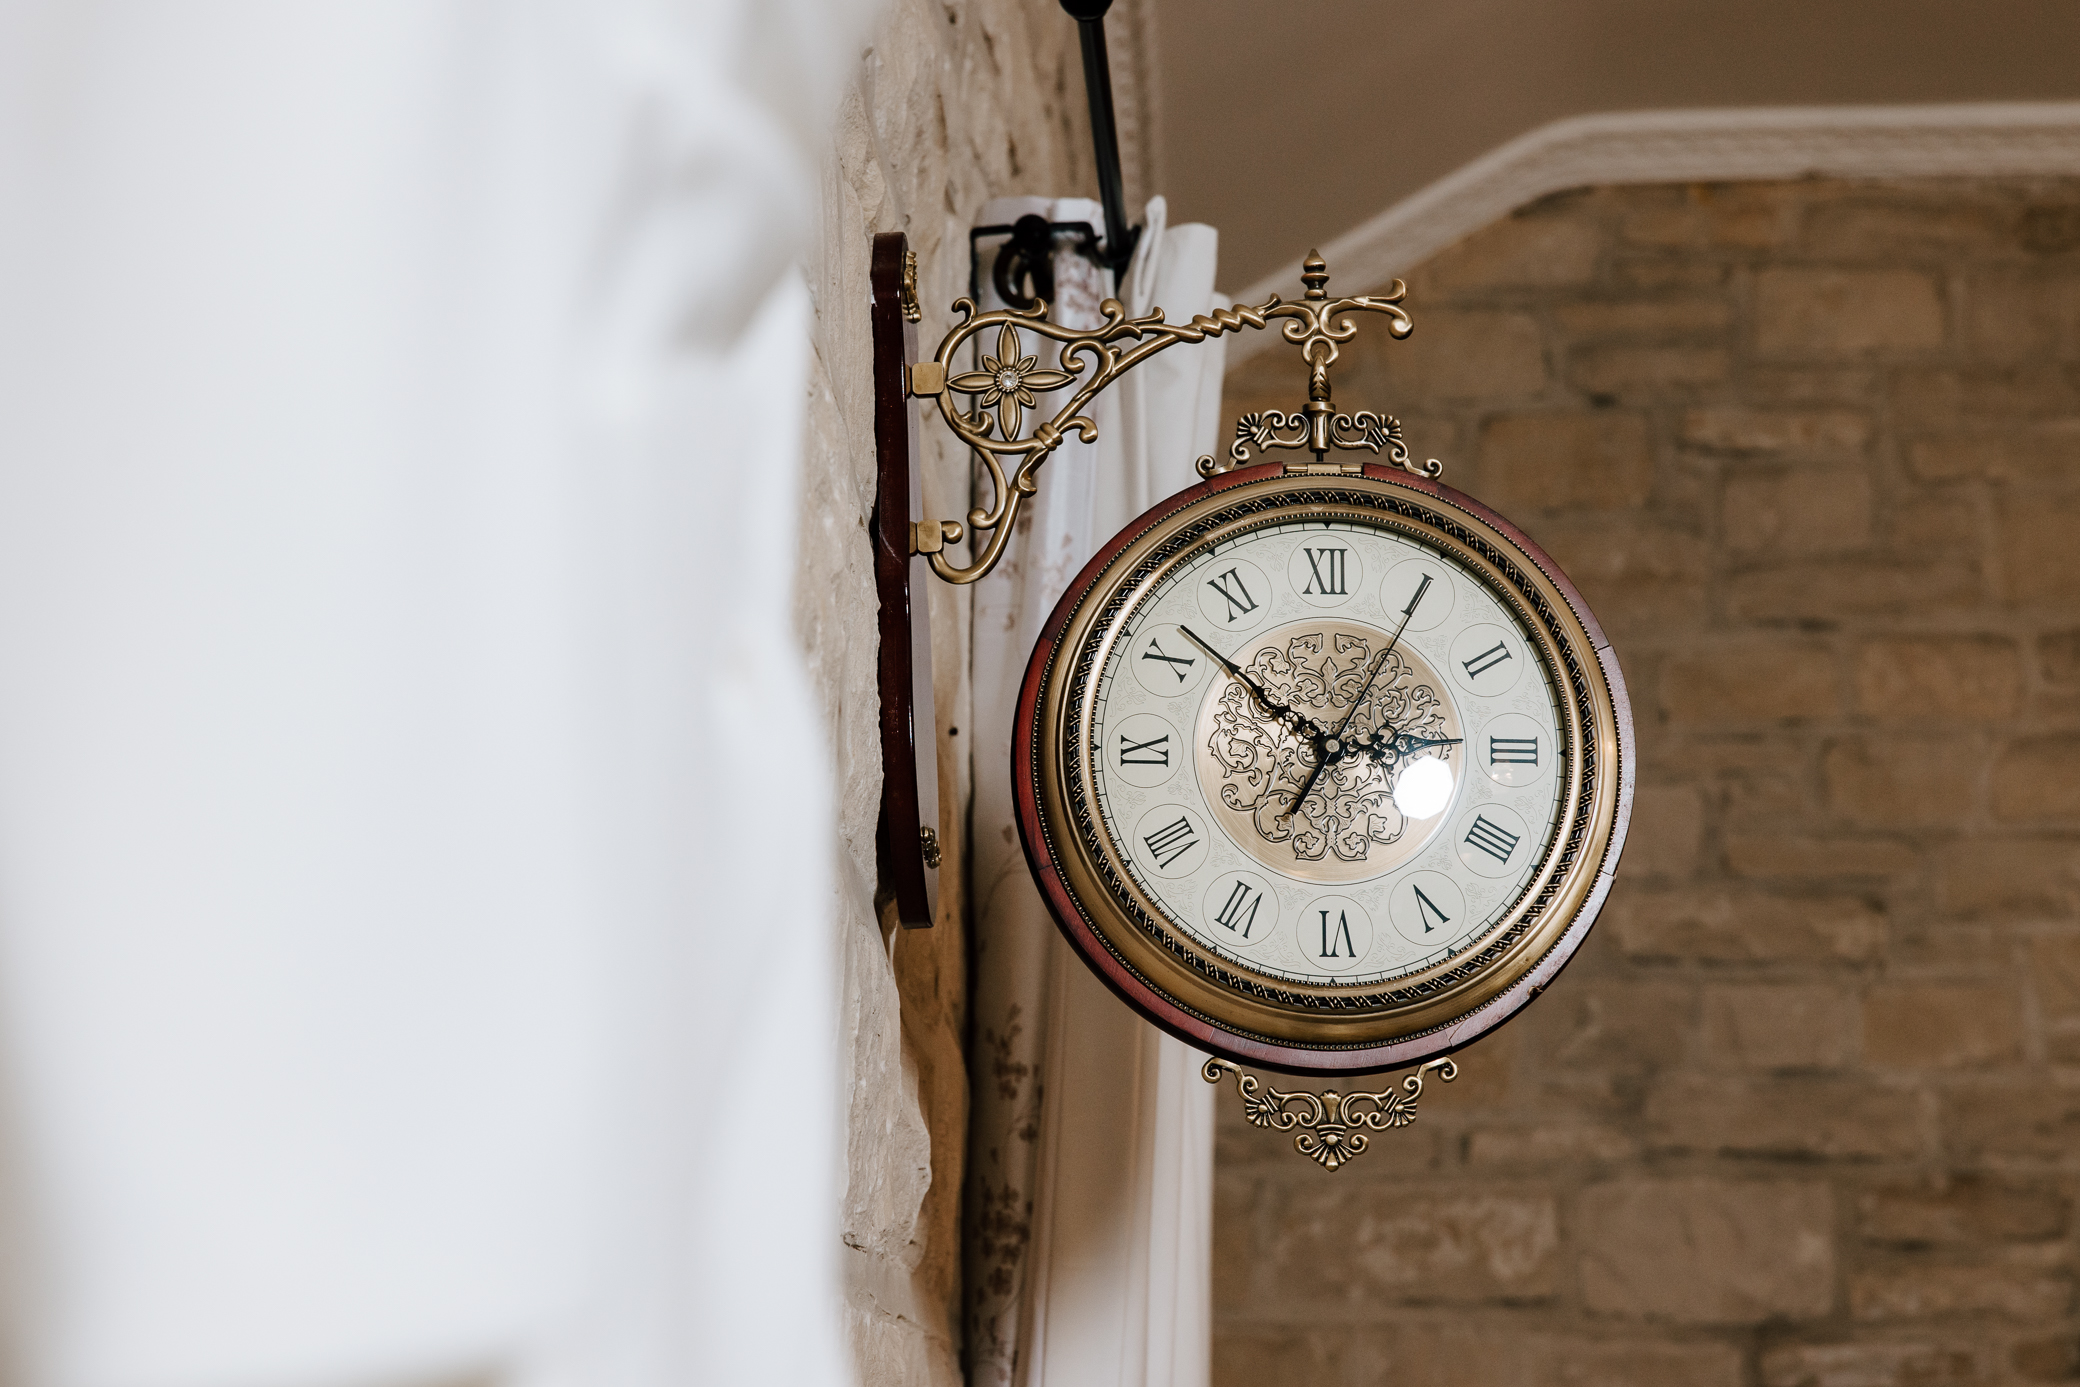 A gold antique clock mounted on the wall of the bridal suite at Knotting Hills in Pevely, Missouri shows the time 2:52 pm.